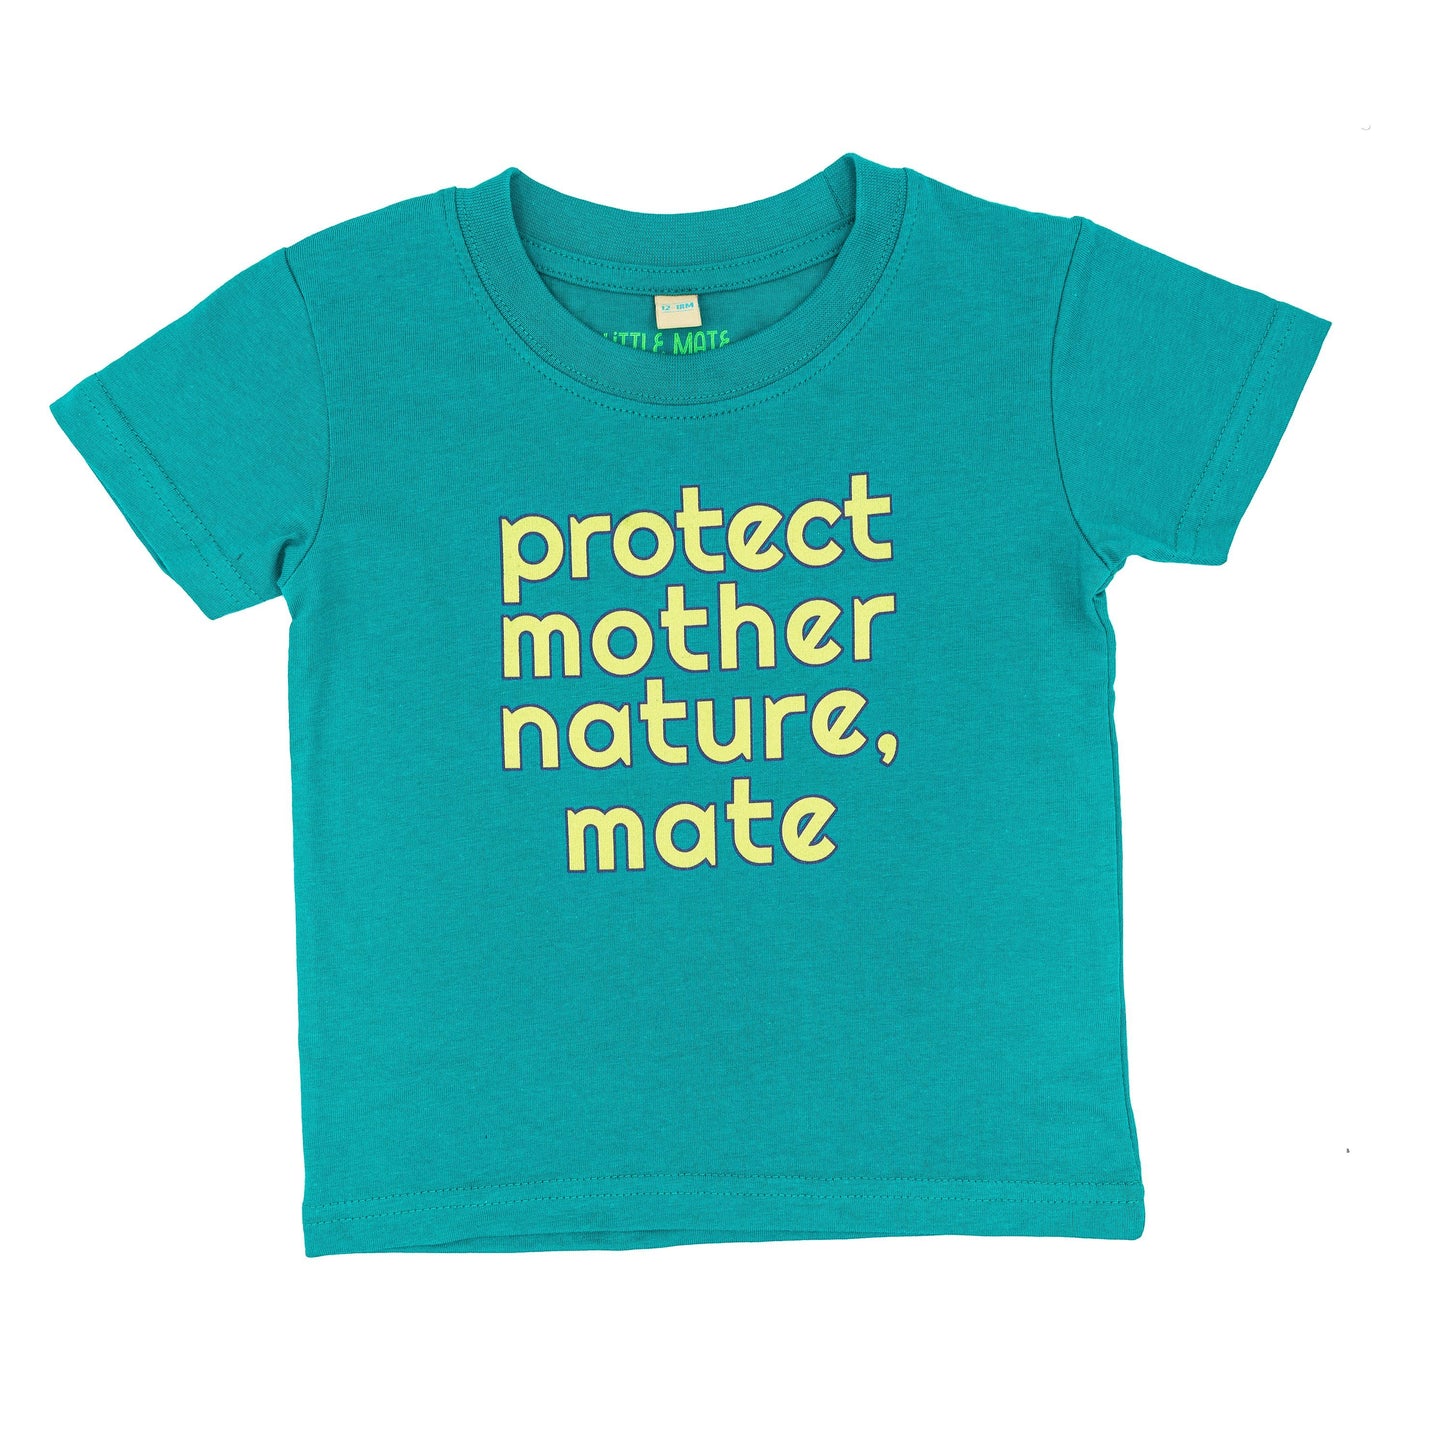 PROTECT MOTHER NATURE, MATE - Short Sleeve T Shirt - Little Mate Adventures